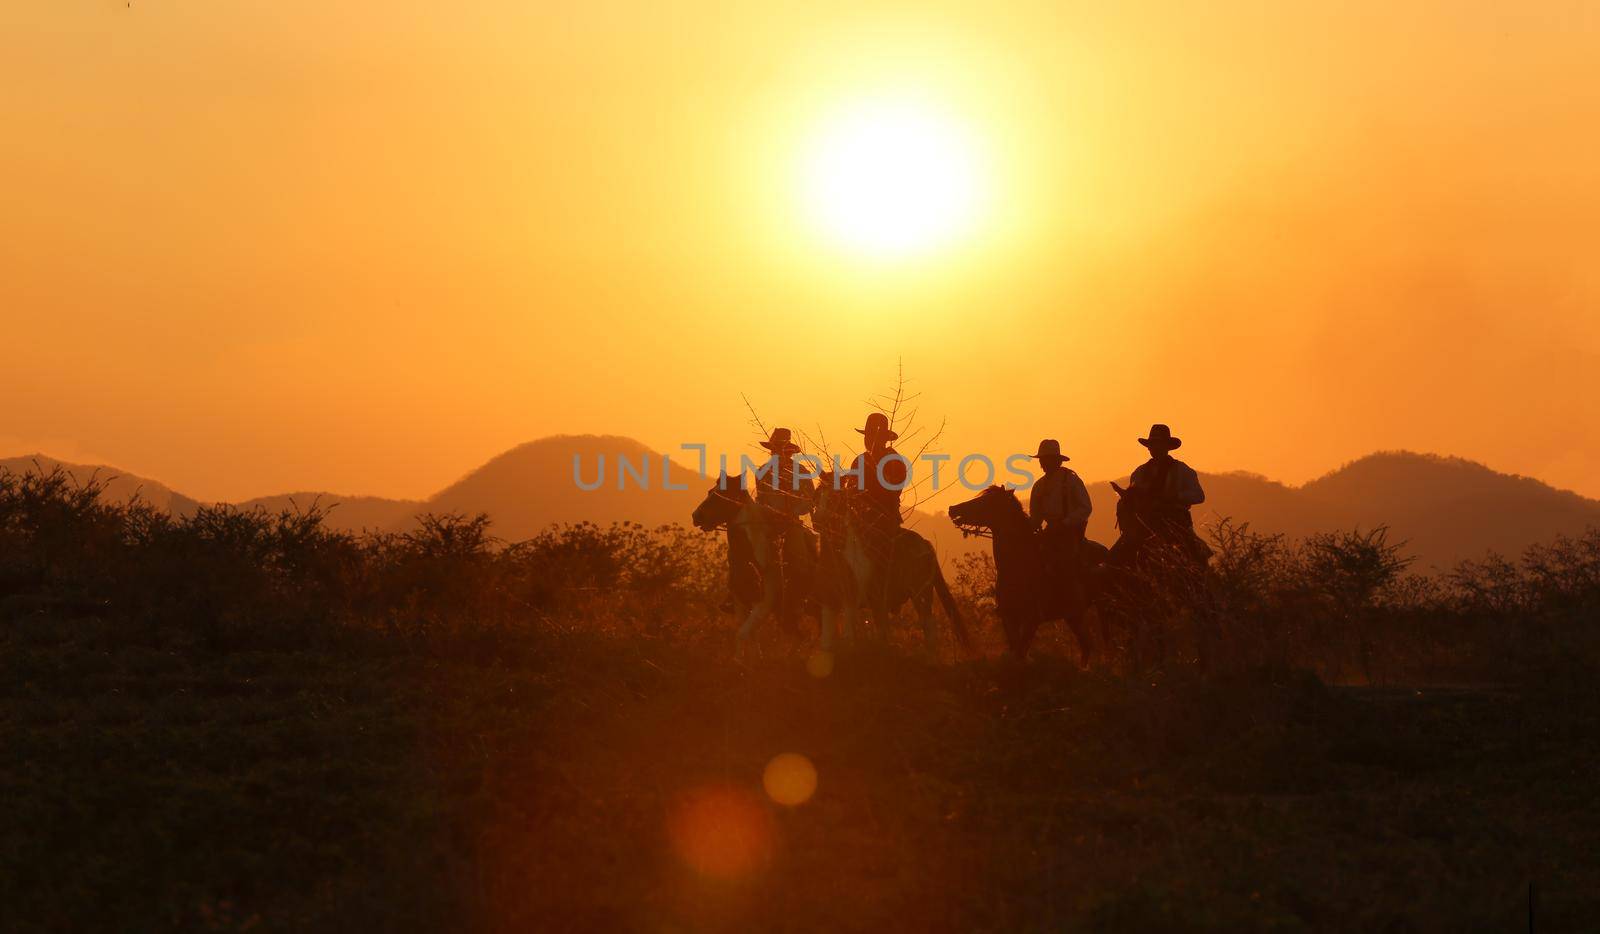 The silhouette of  rider as cowboy outfit costume with a horses and a gun held in the hand against smoke and sunset background